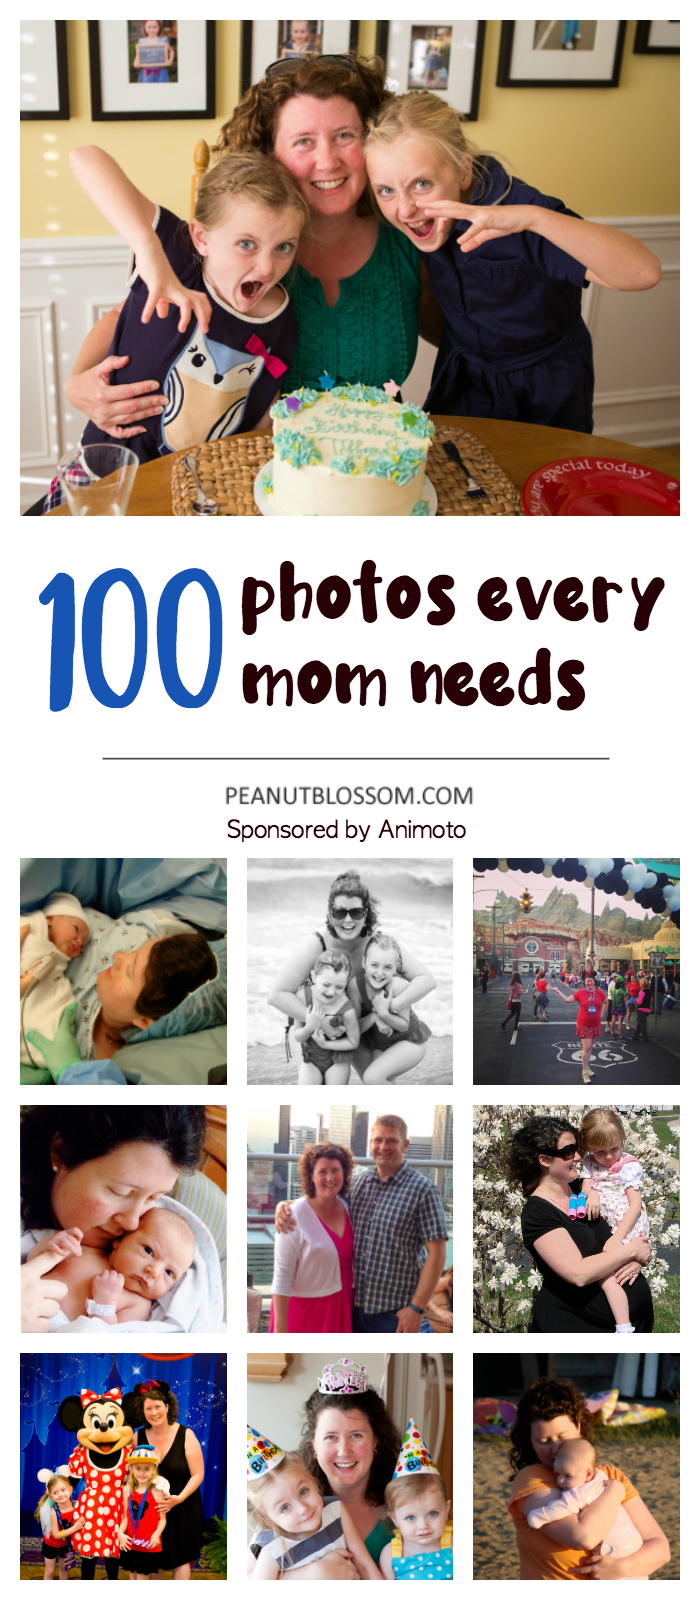 100 photos every mom needs before her 40th birthday